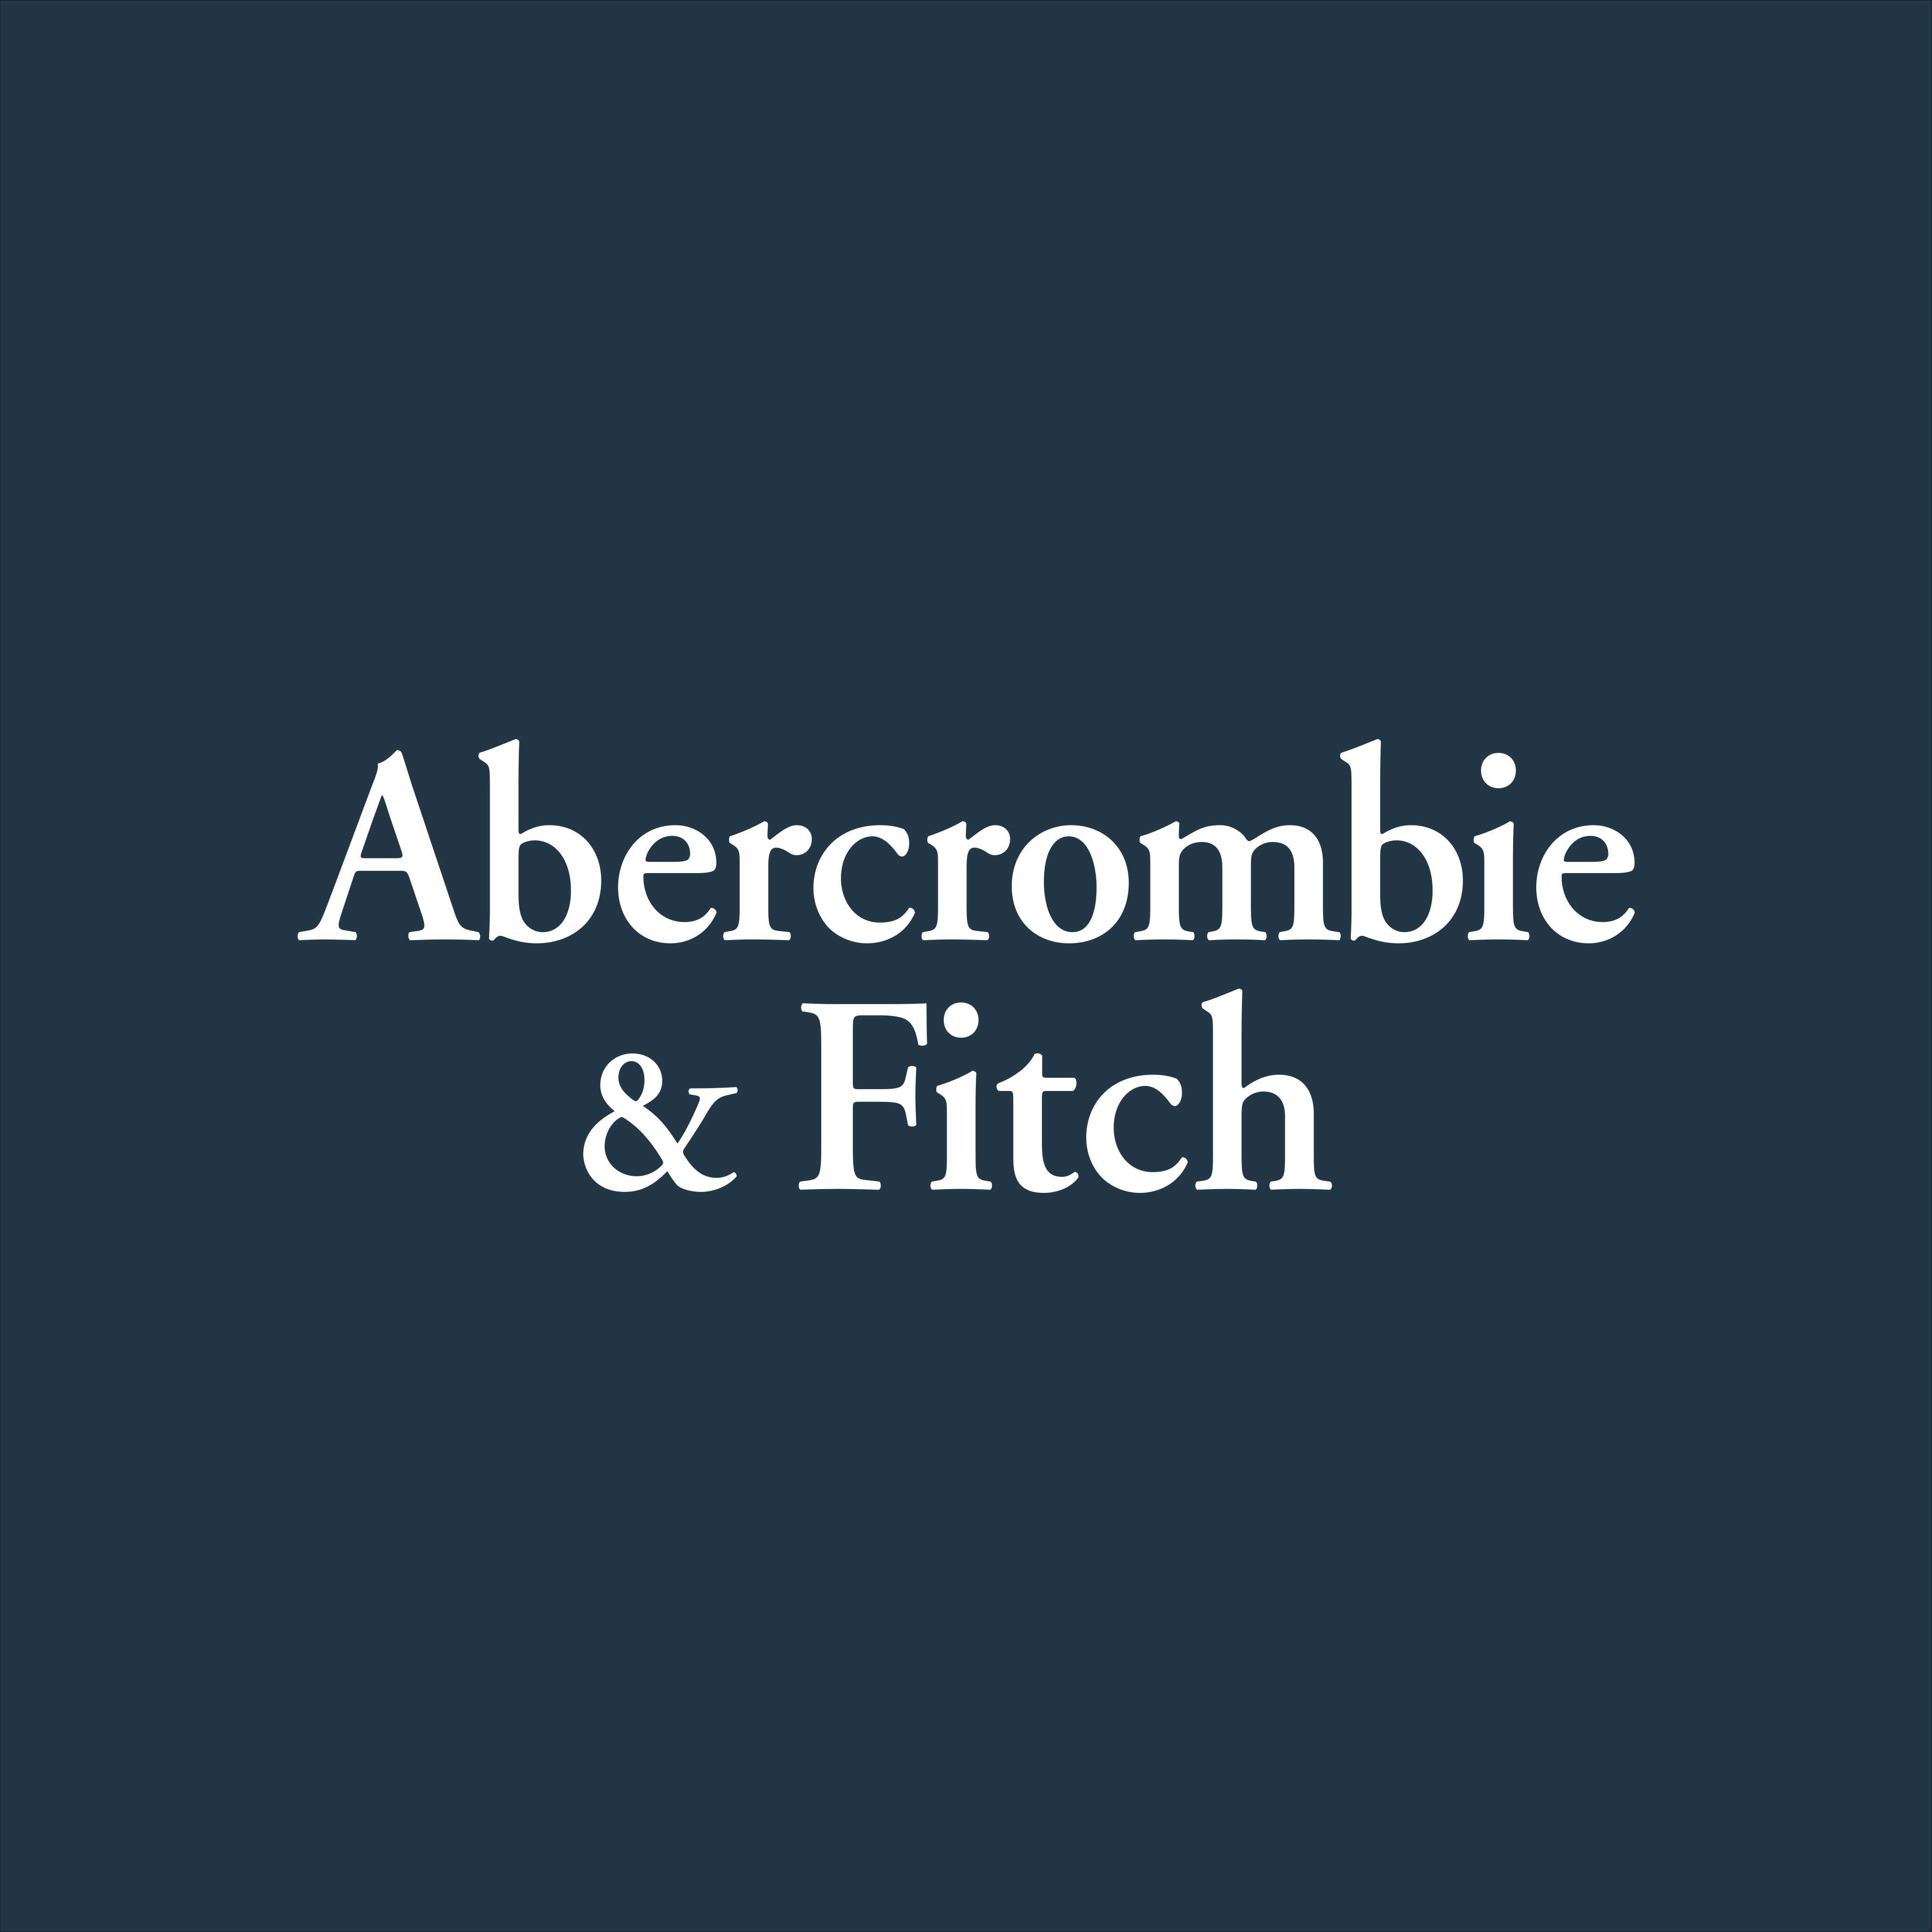 Abercrombie u0026 Fitch | Authentic American clothing since 1892